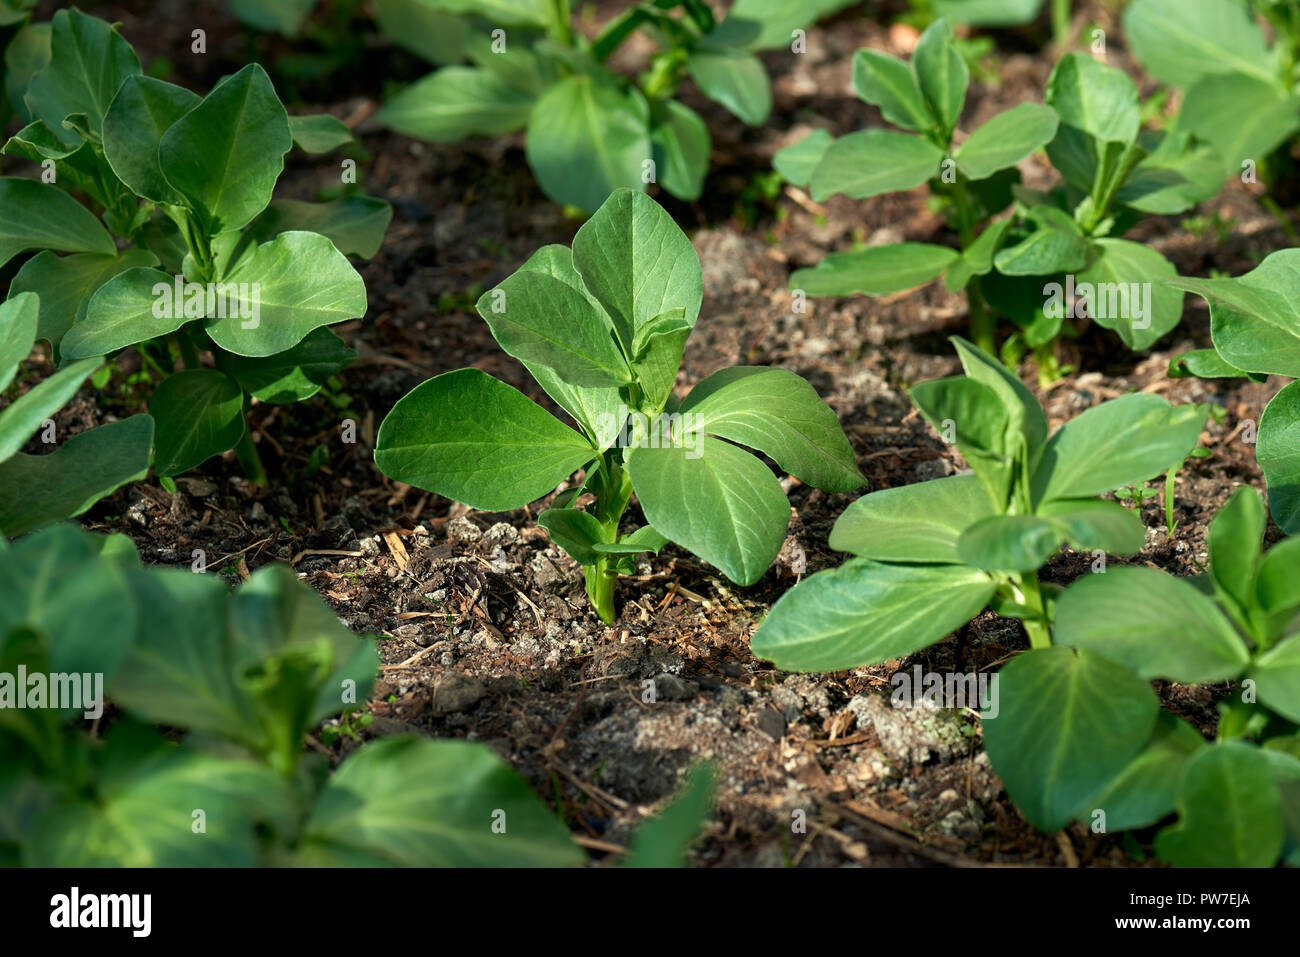 Young Healthy Broad Bean Shoots In A Spring Garden Bed Stock Photo